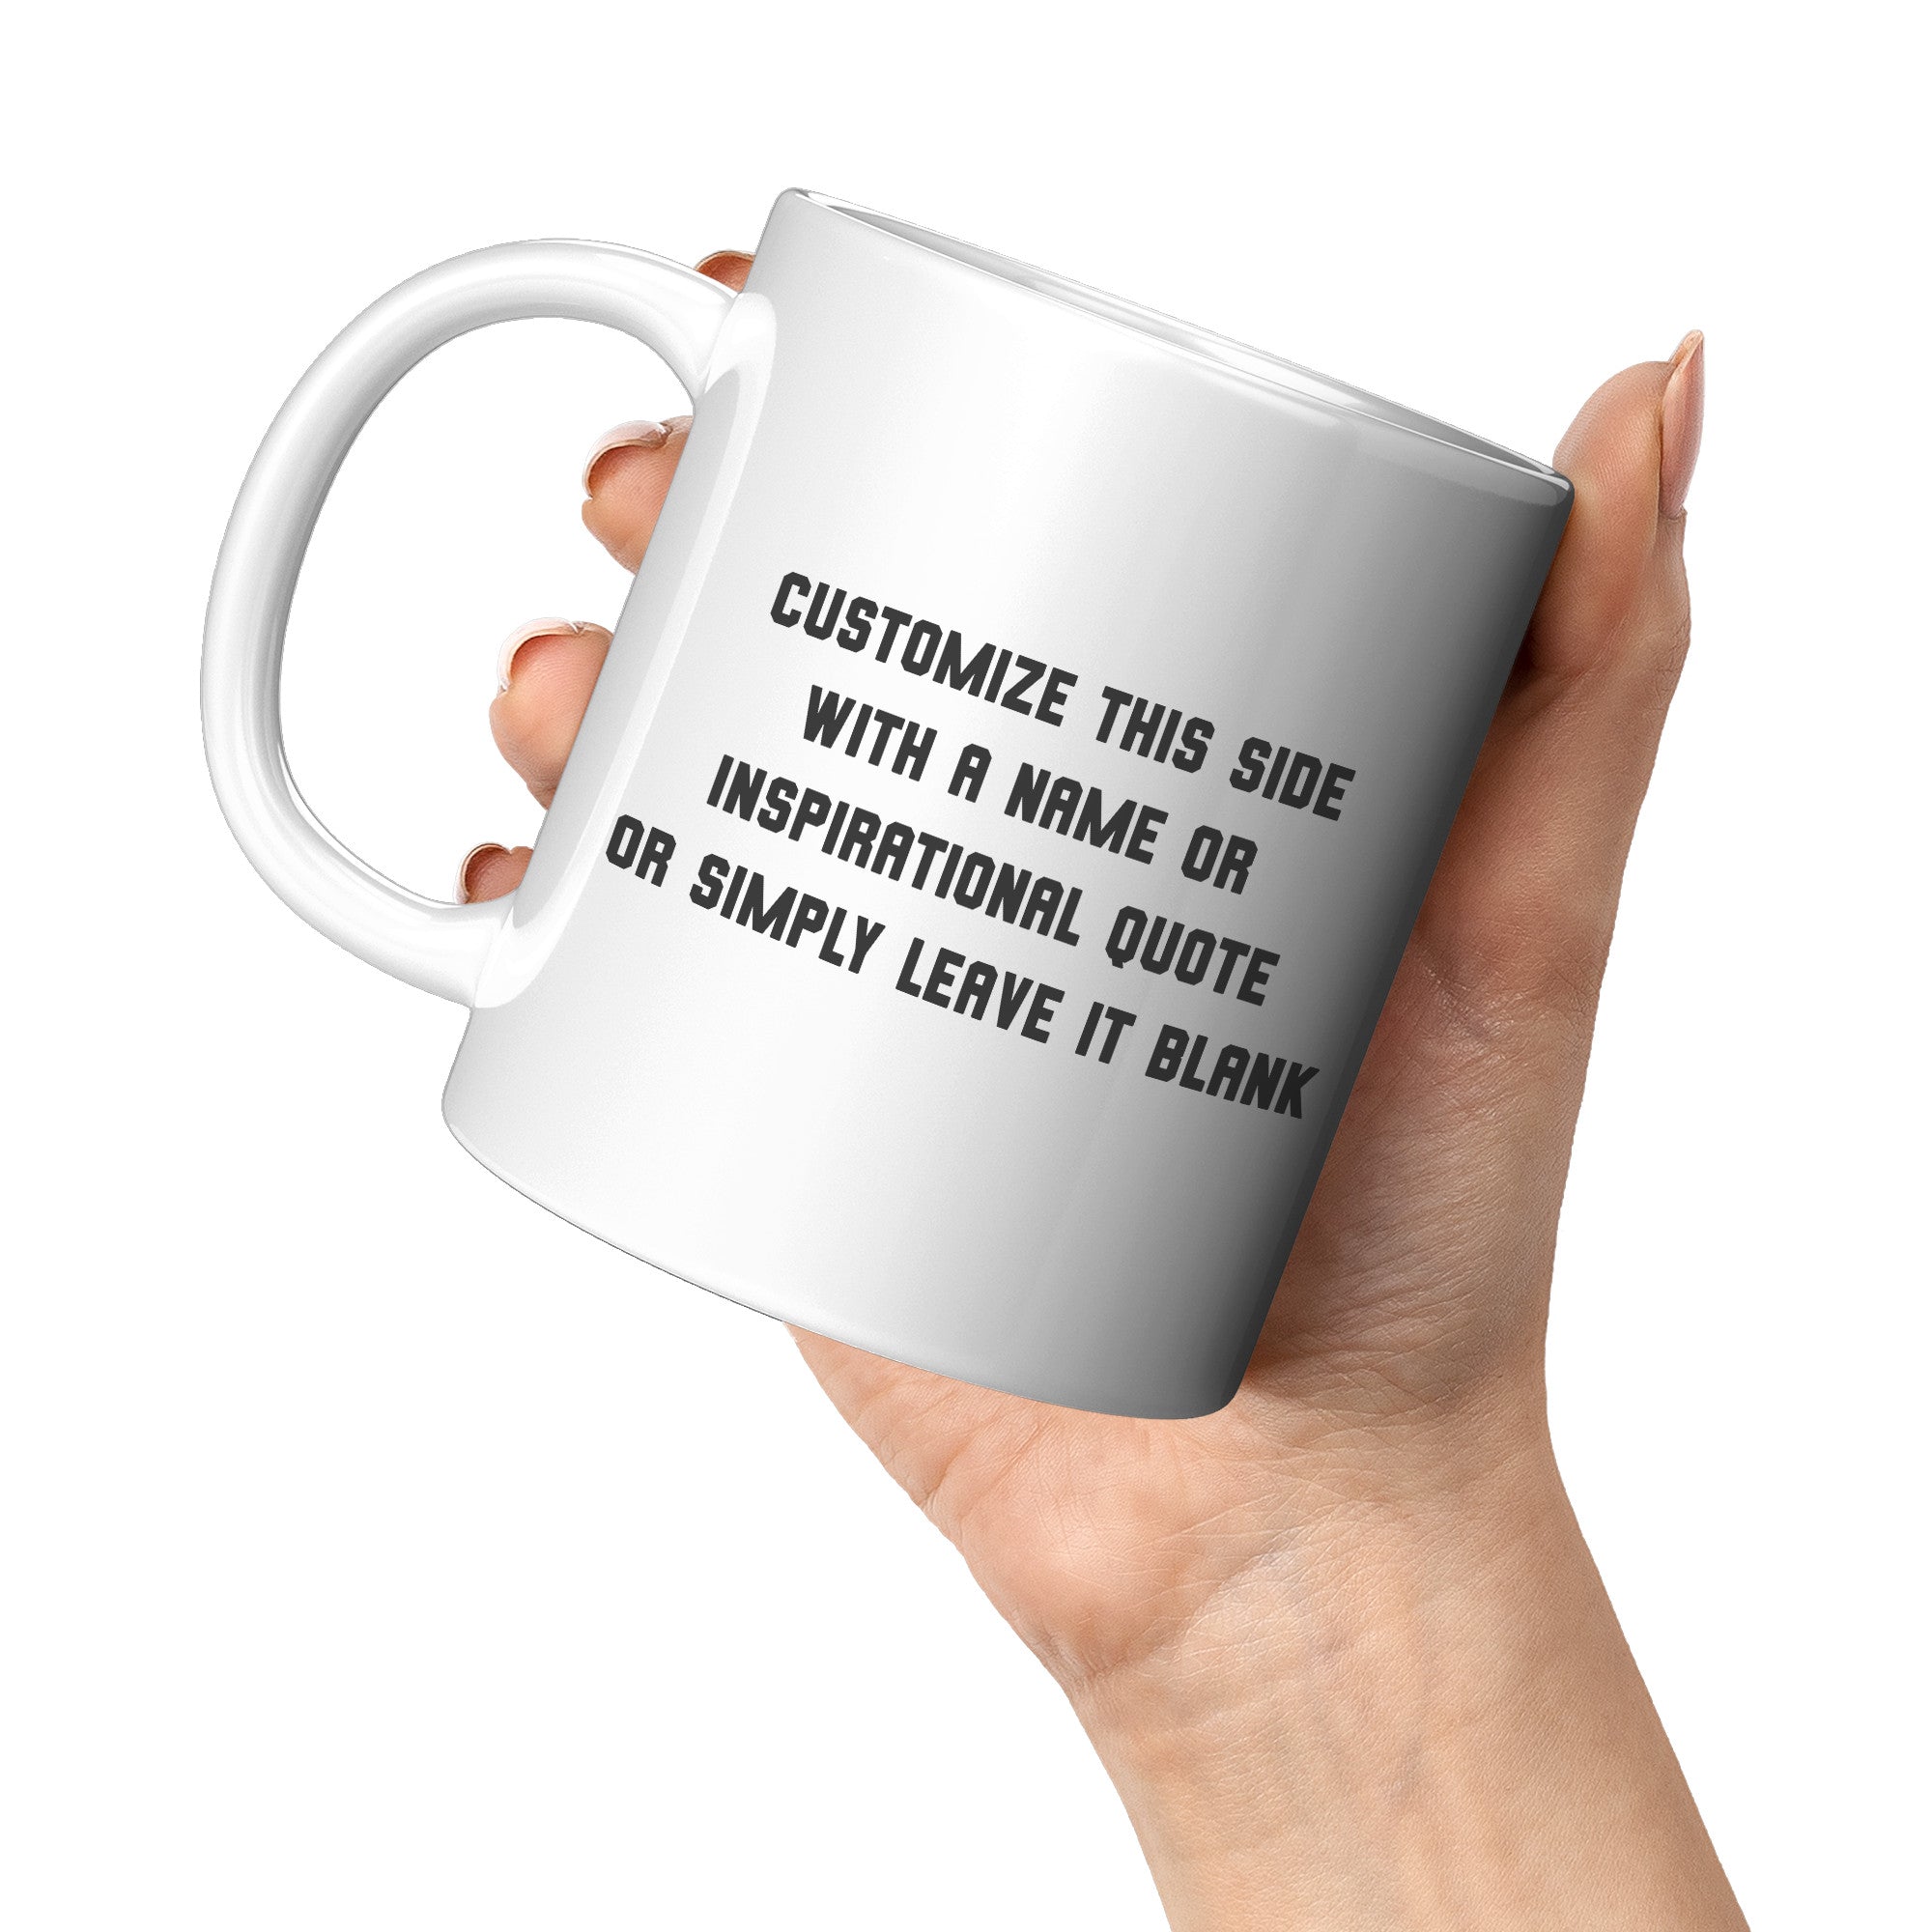 Male Runner Inspirational Mug - Motivational Running Quotes Cup - Perfect Gift for Marathon Men - Runner's Daily Dose of Determination - G